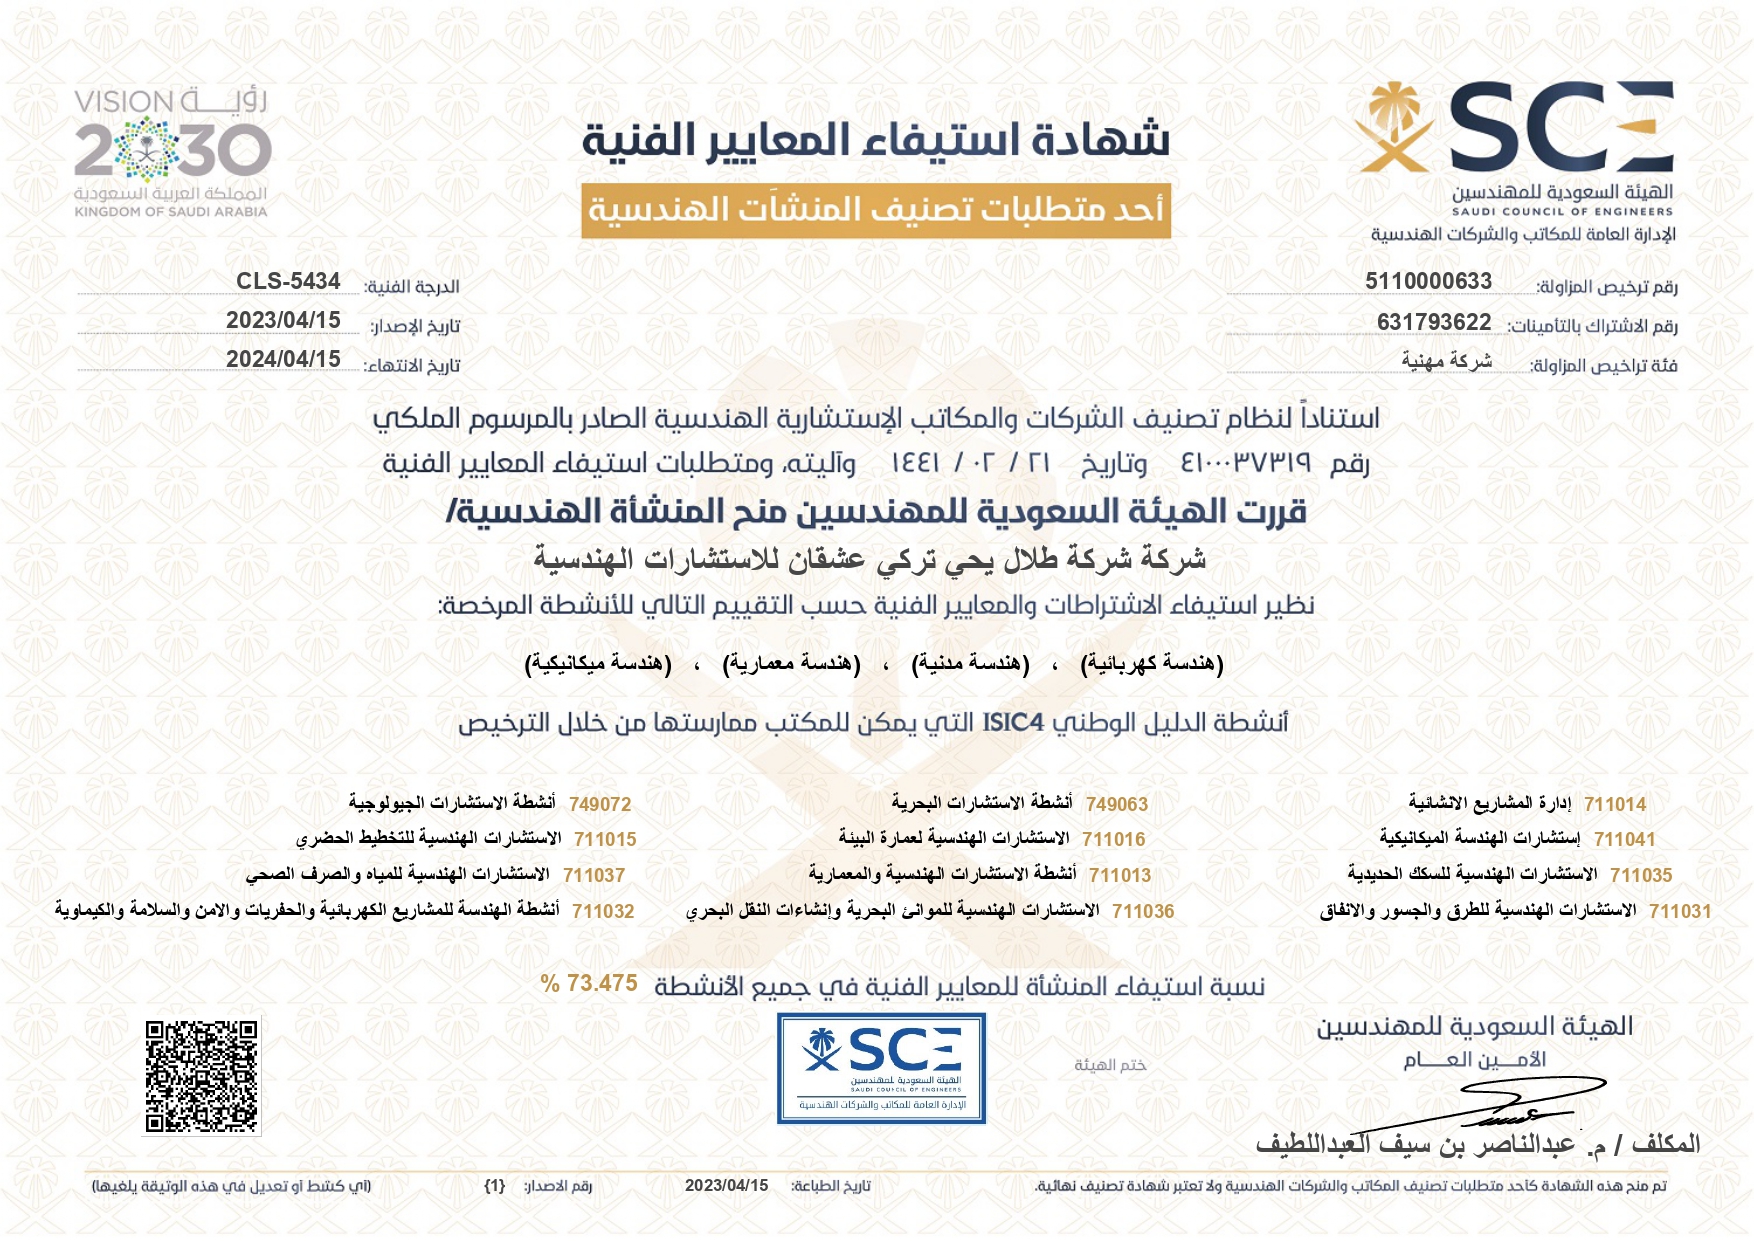 CERTIFICATES OF MEETING TECHNICAL STANDARDS FROM SCE